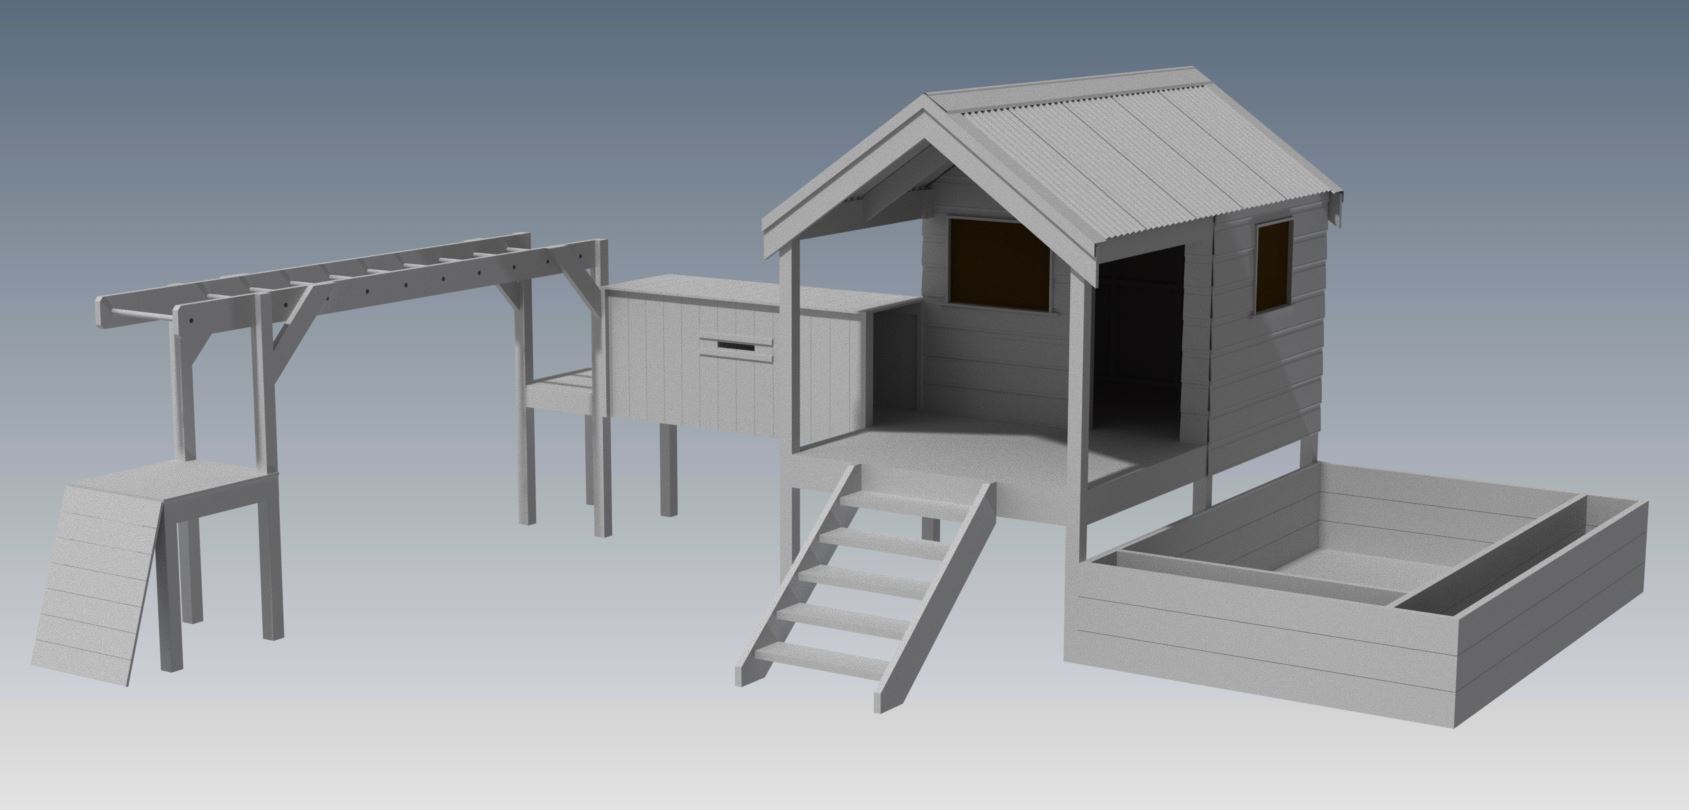 CUBBY HOUSE Building Plans V4 "Great Aussie Outback Style" PLAY HOUSE